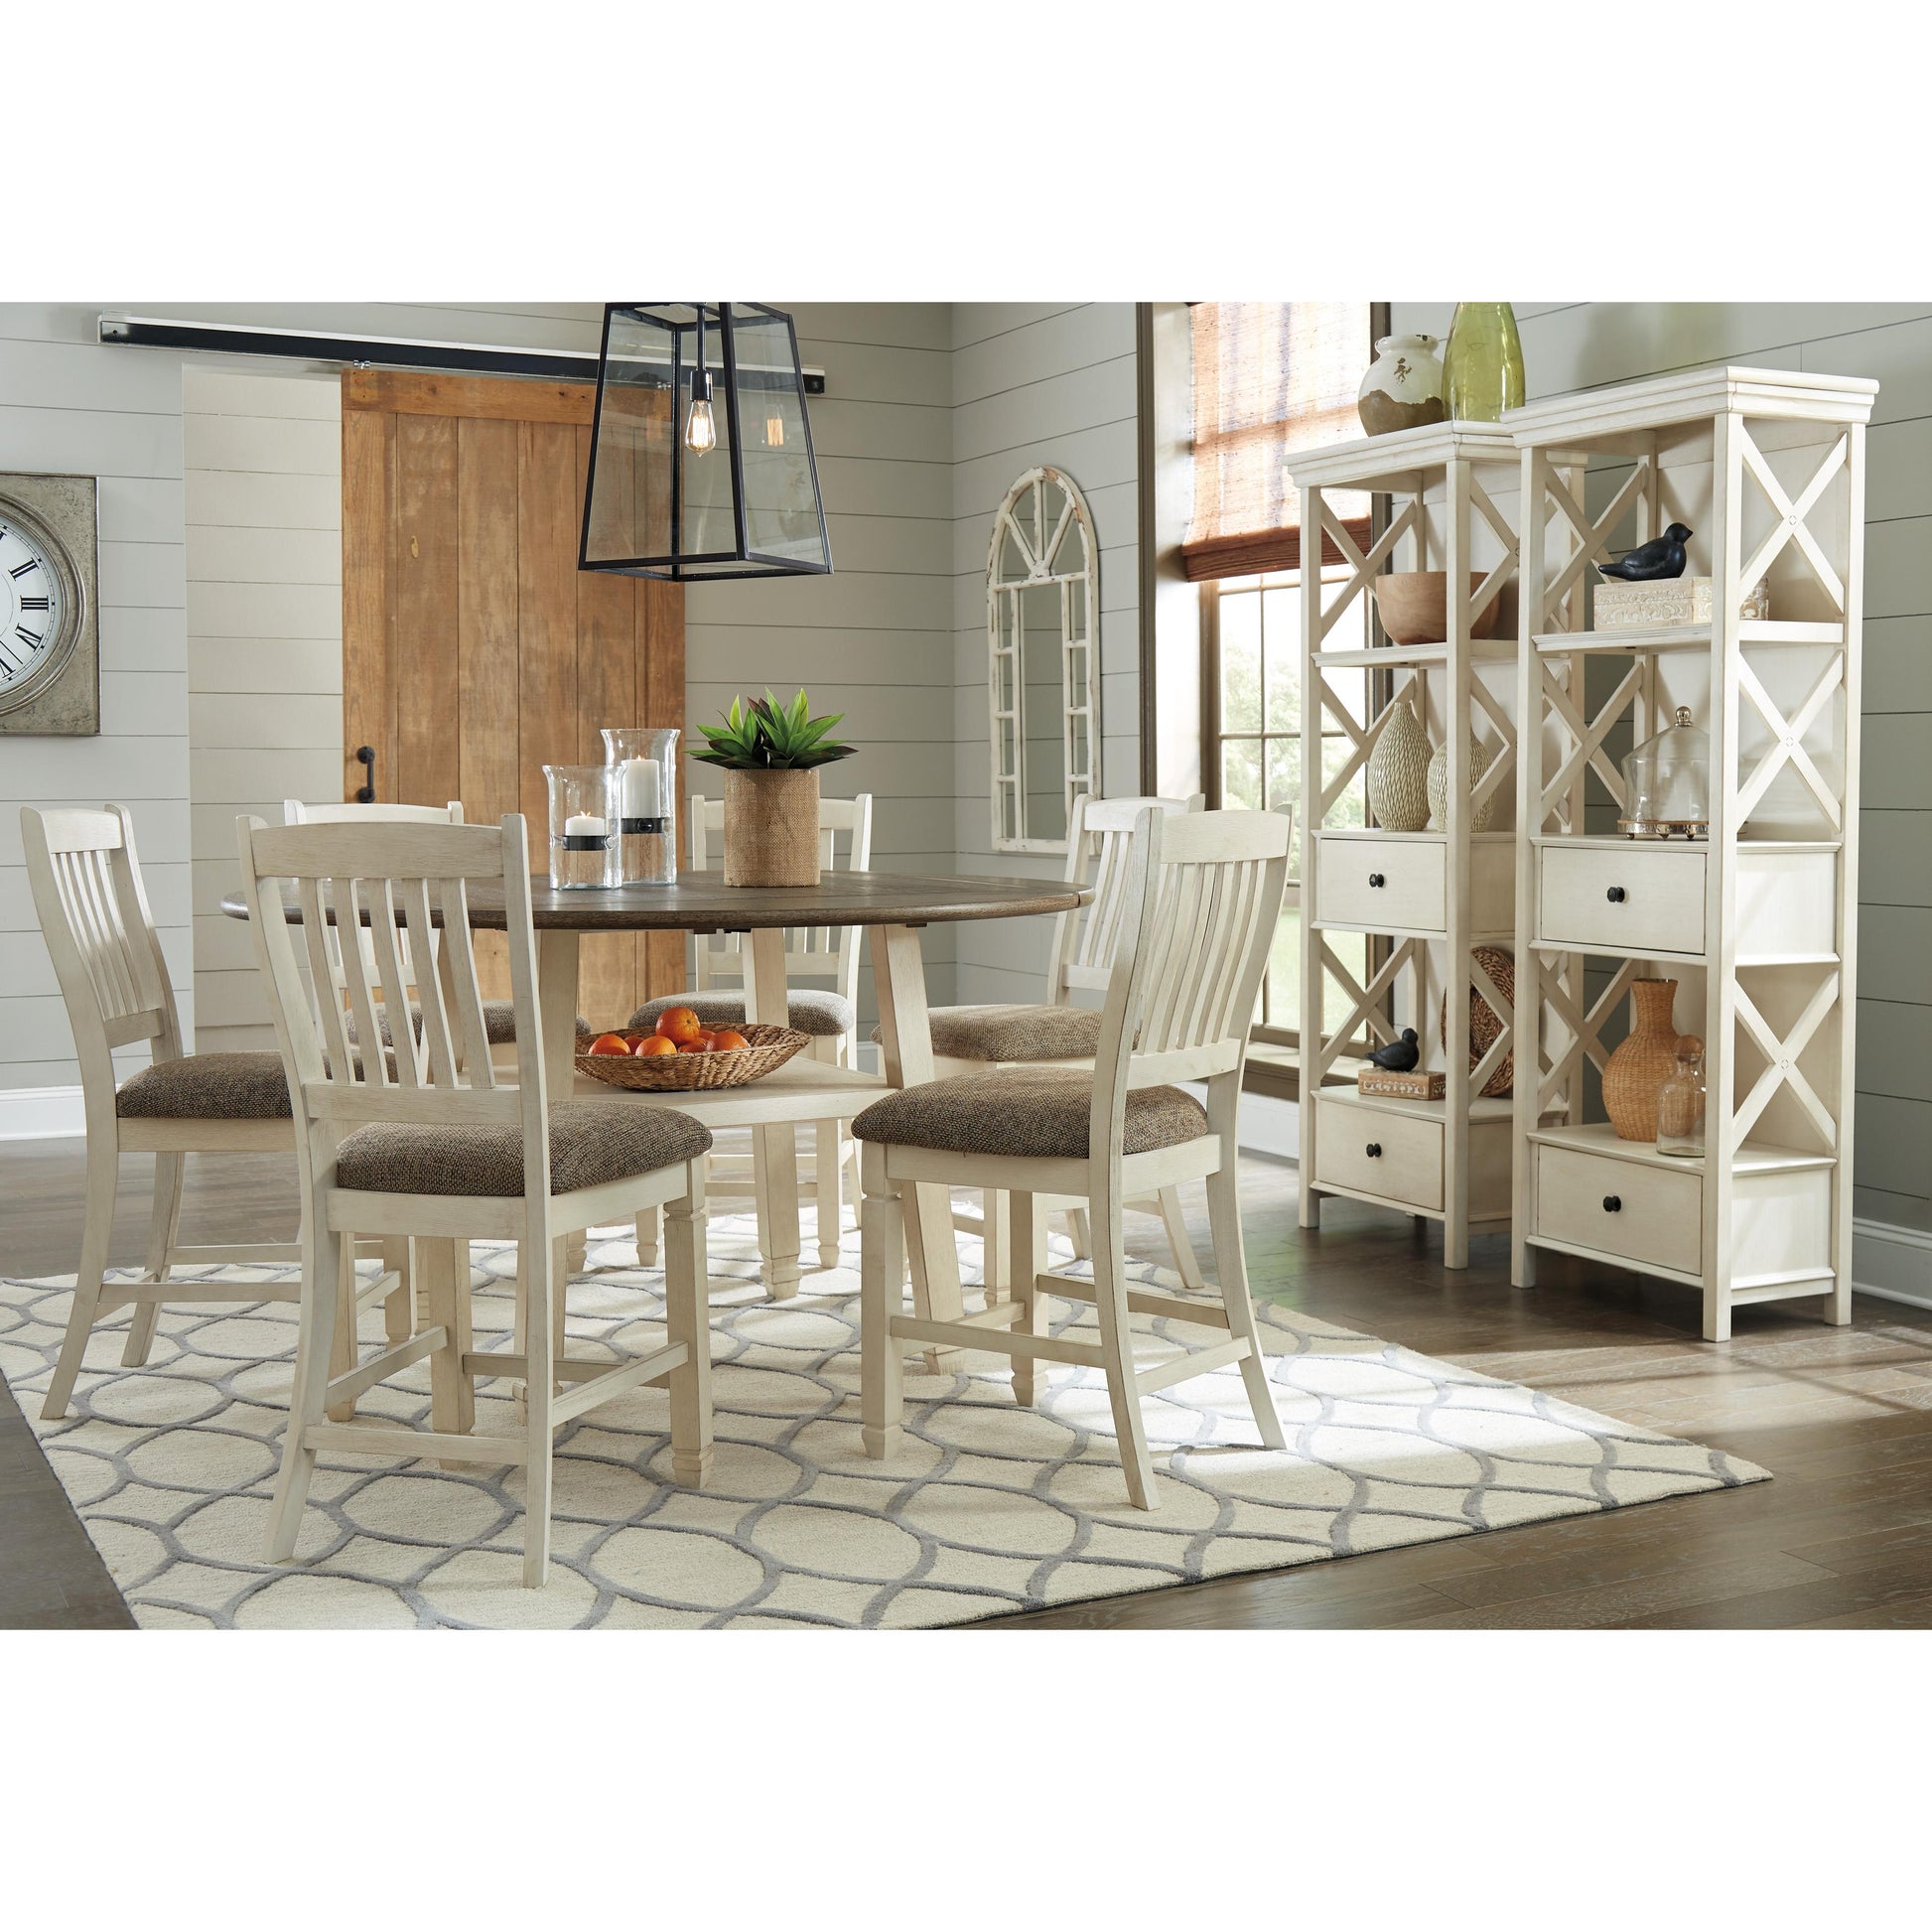 Signature Design by Ashley Round Bolanburg Counter Height Dining Table with Pedestal Base D647-13